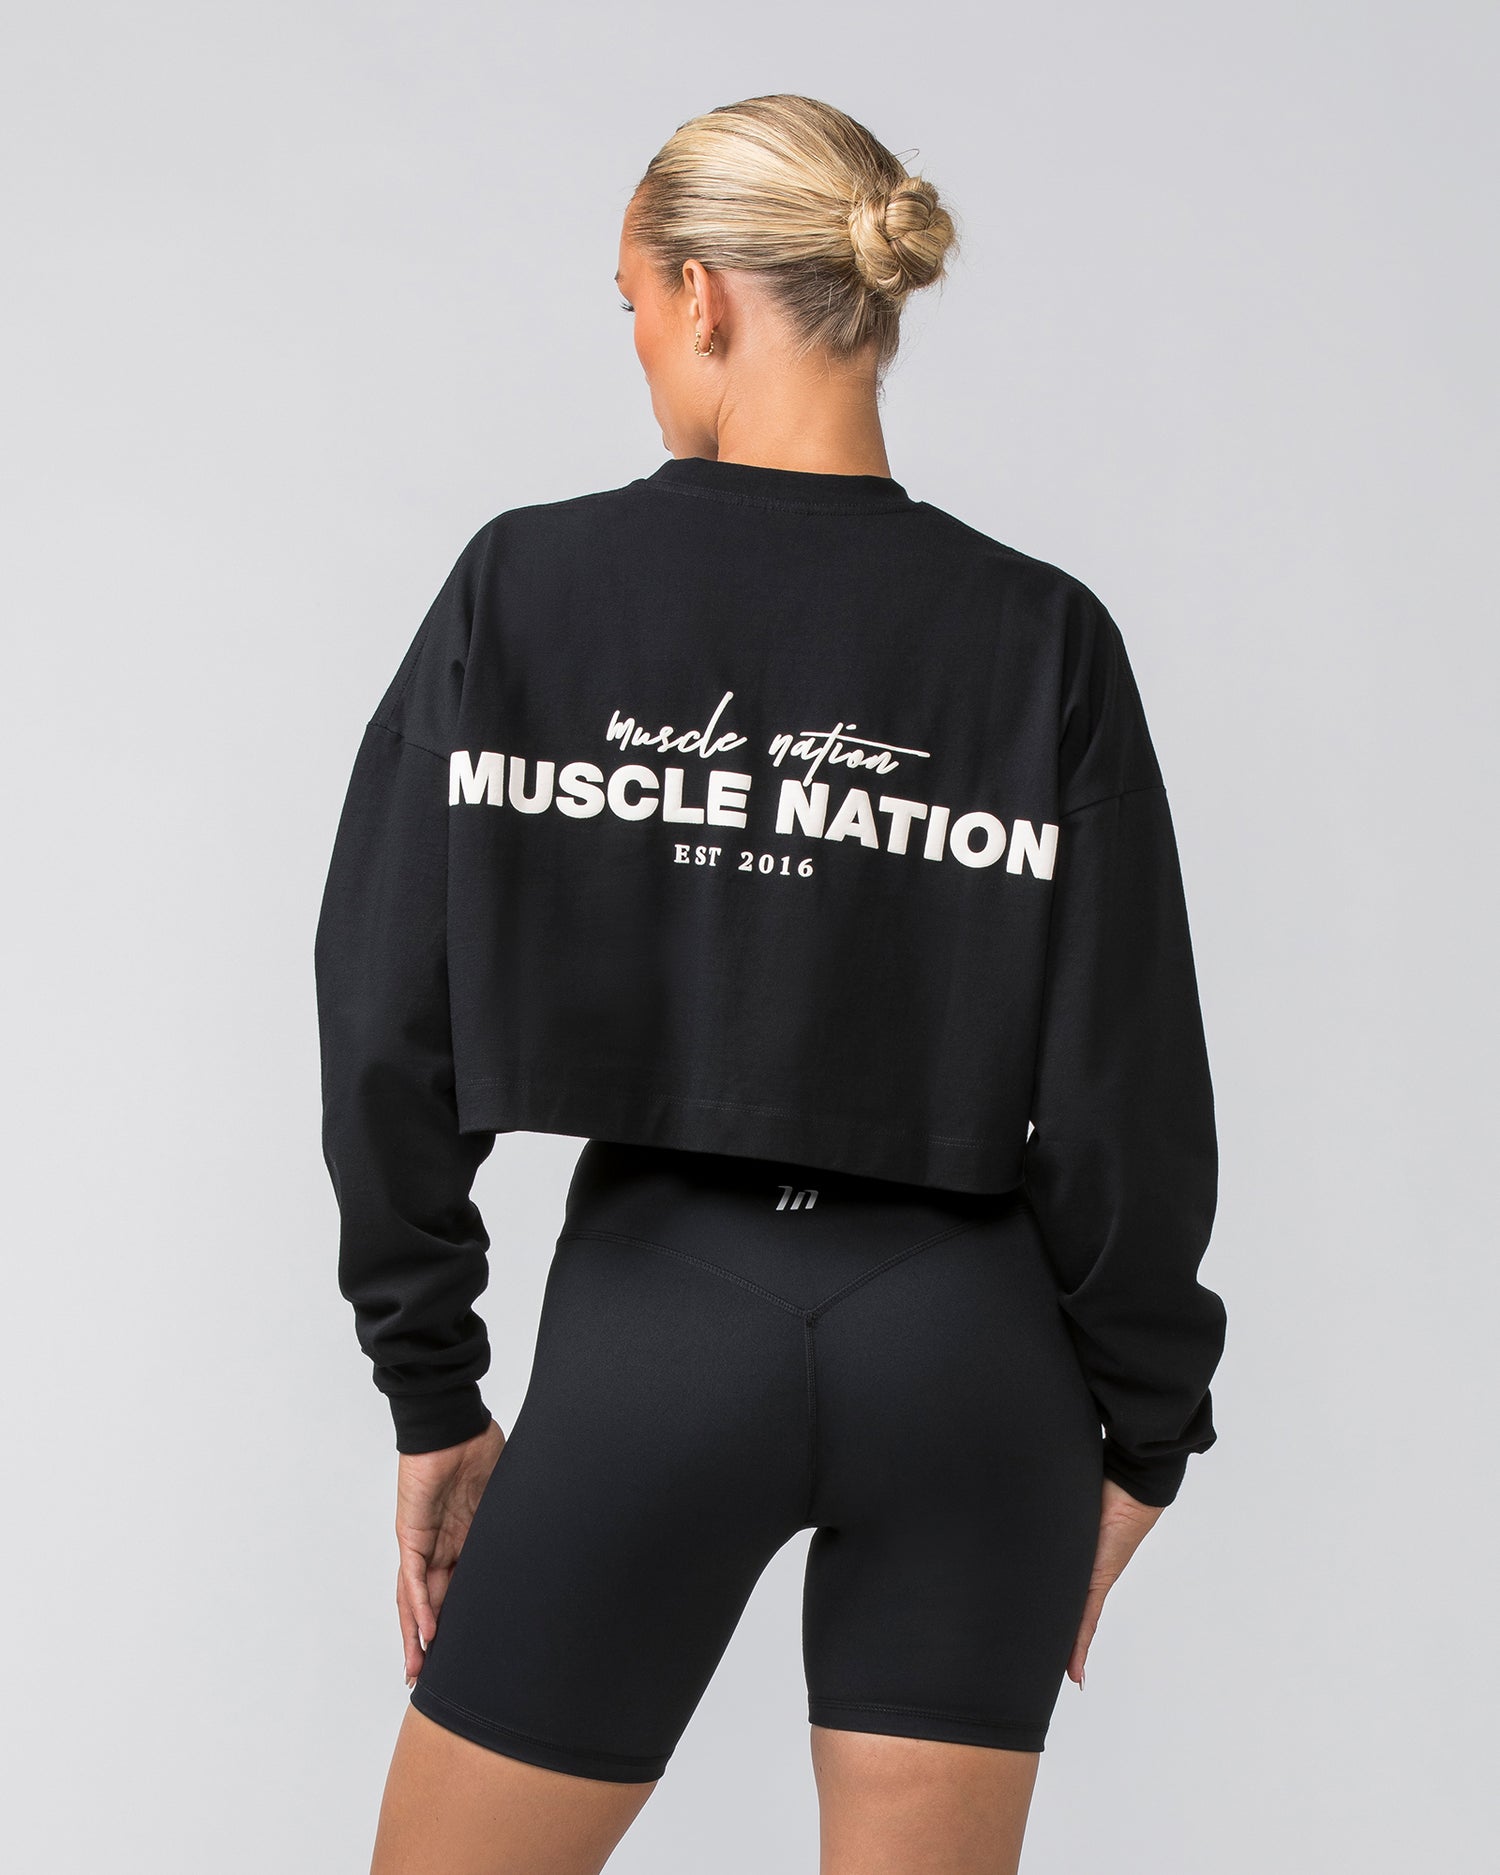 Pace Cropped Long Sleeve Tee - Black